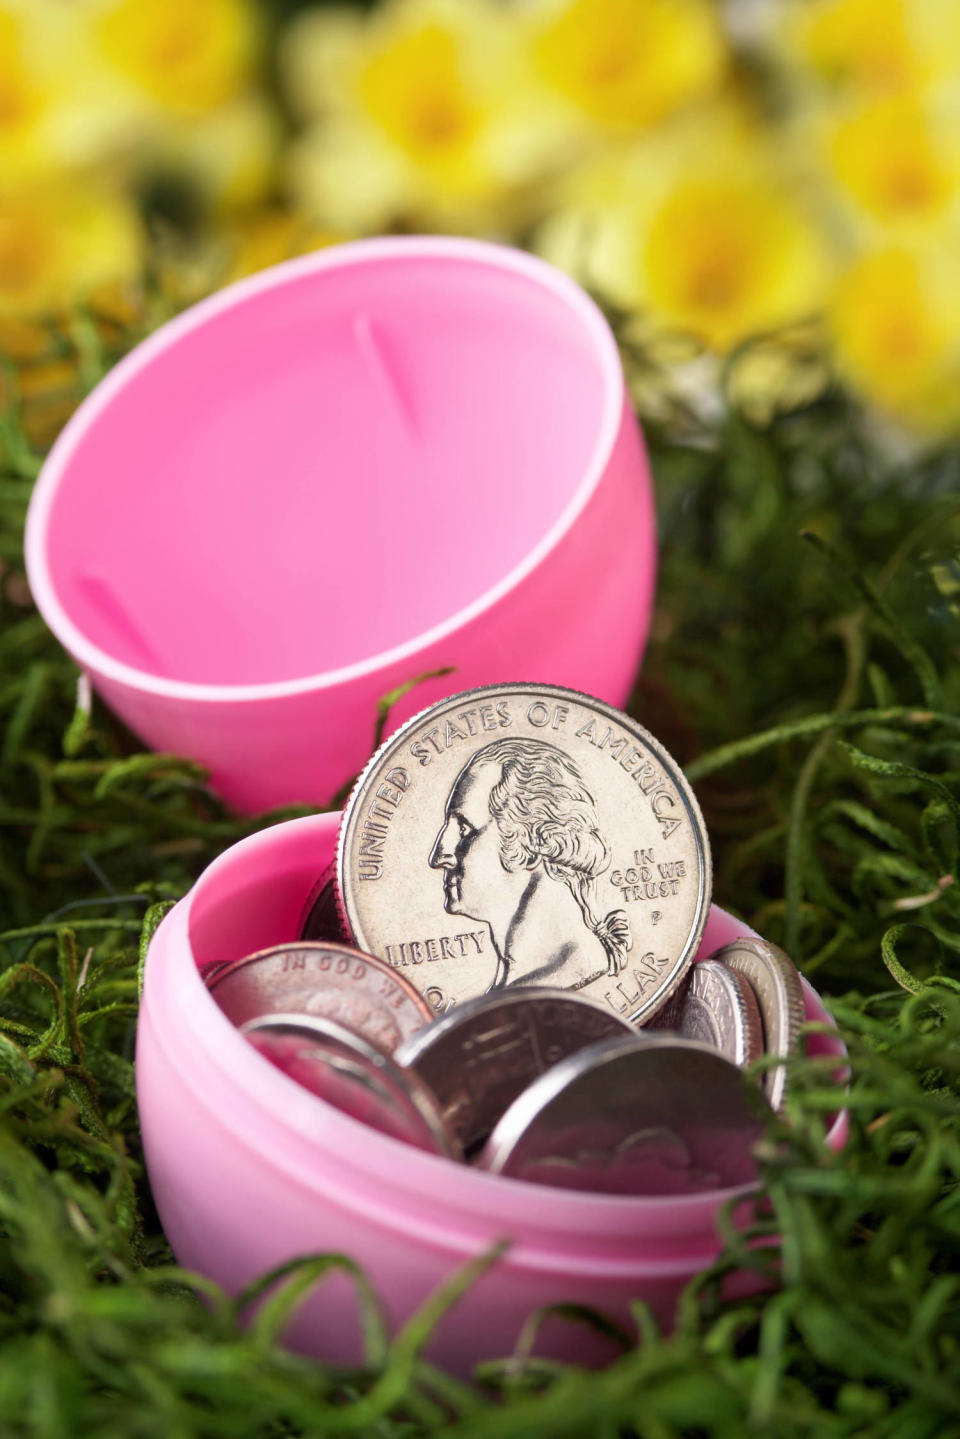 Coins in a Plastic Easter Egg (Getty Images / iStockphoto)